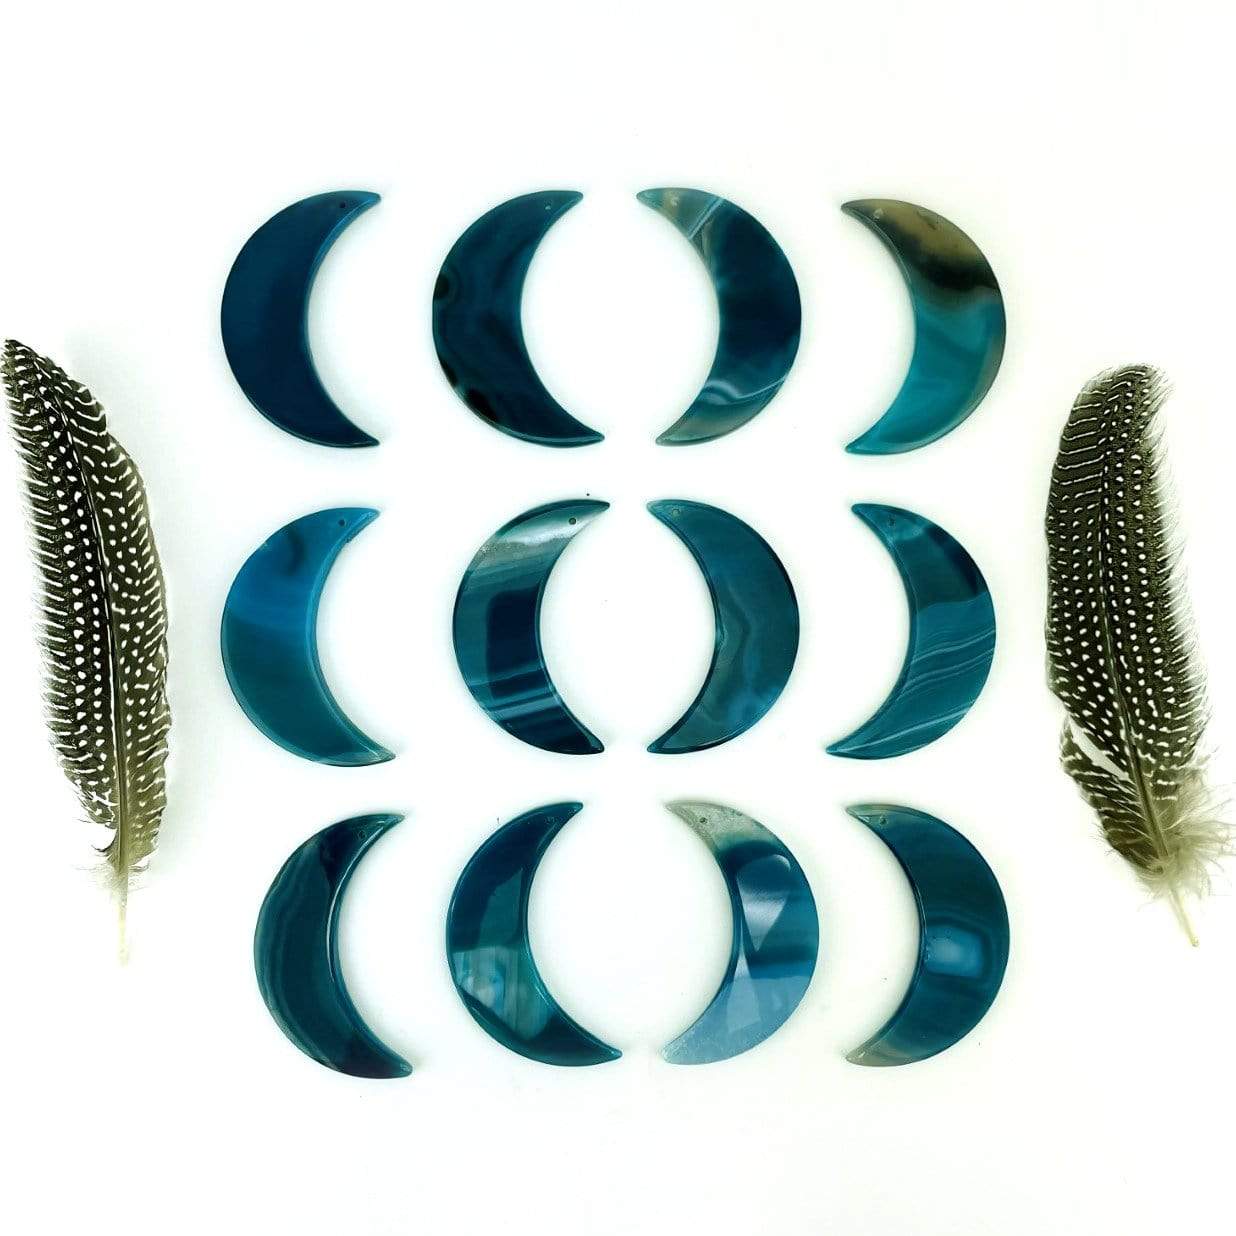 Twelve teal agate moons displayed on a white surface next to feathers.